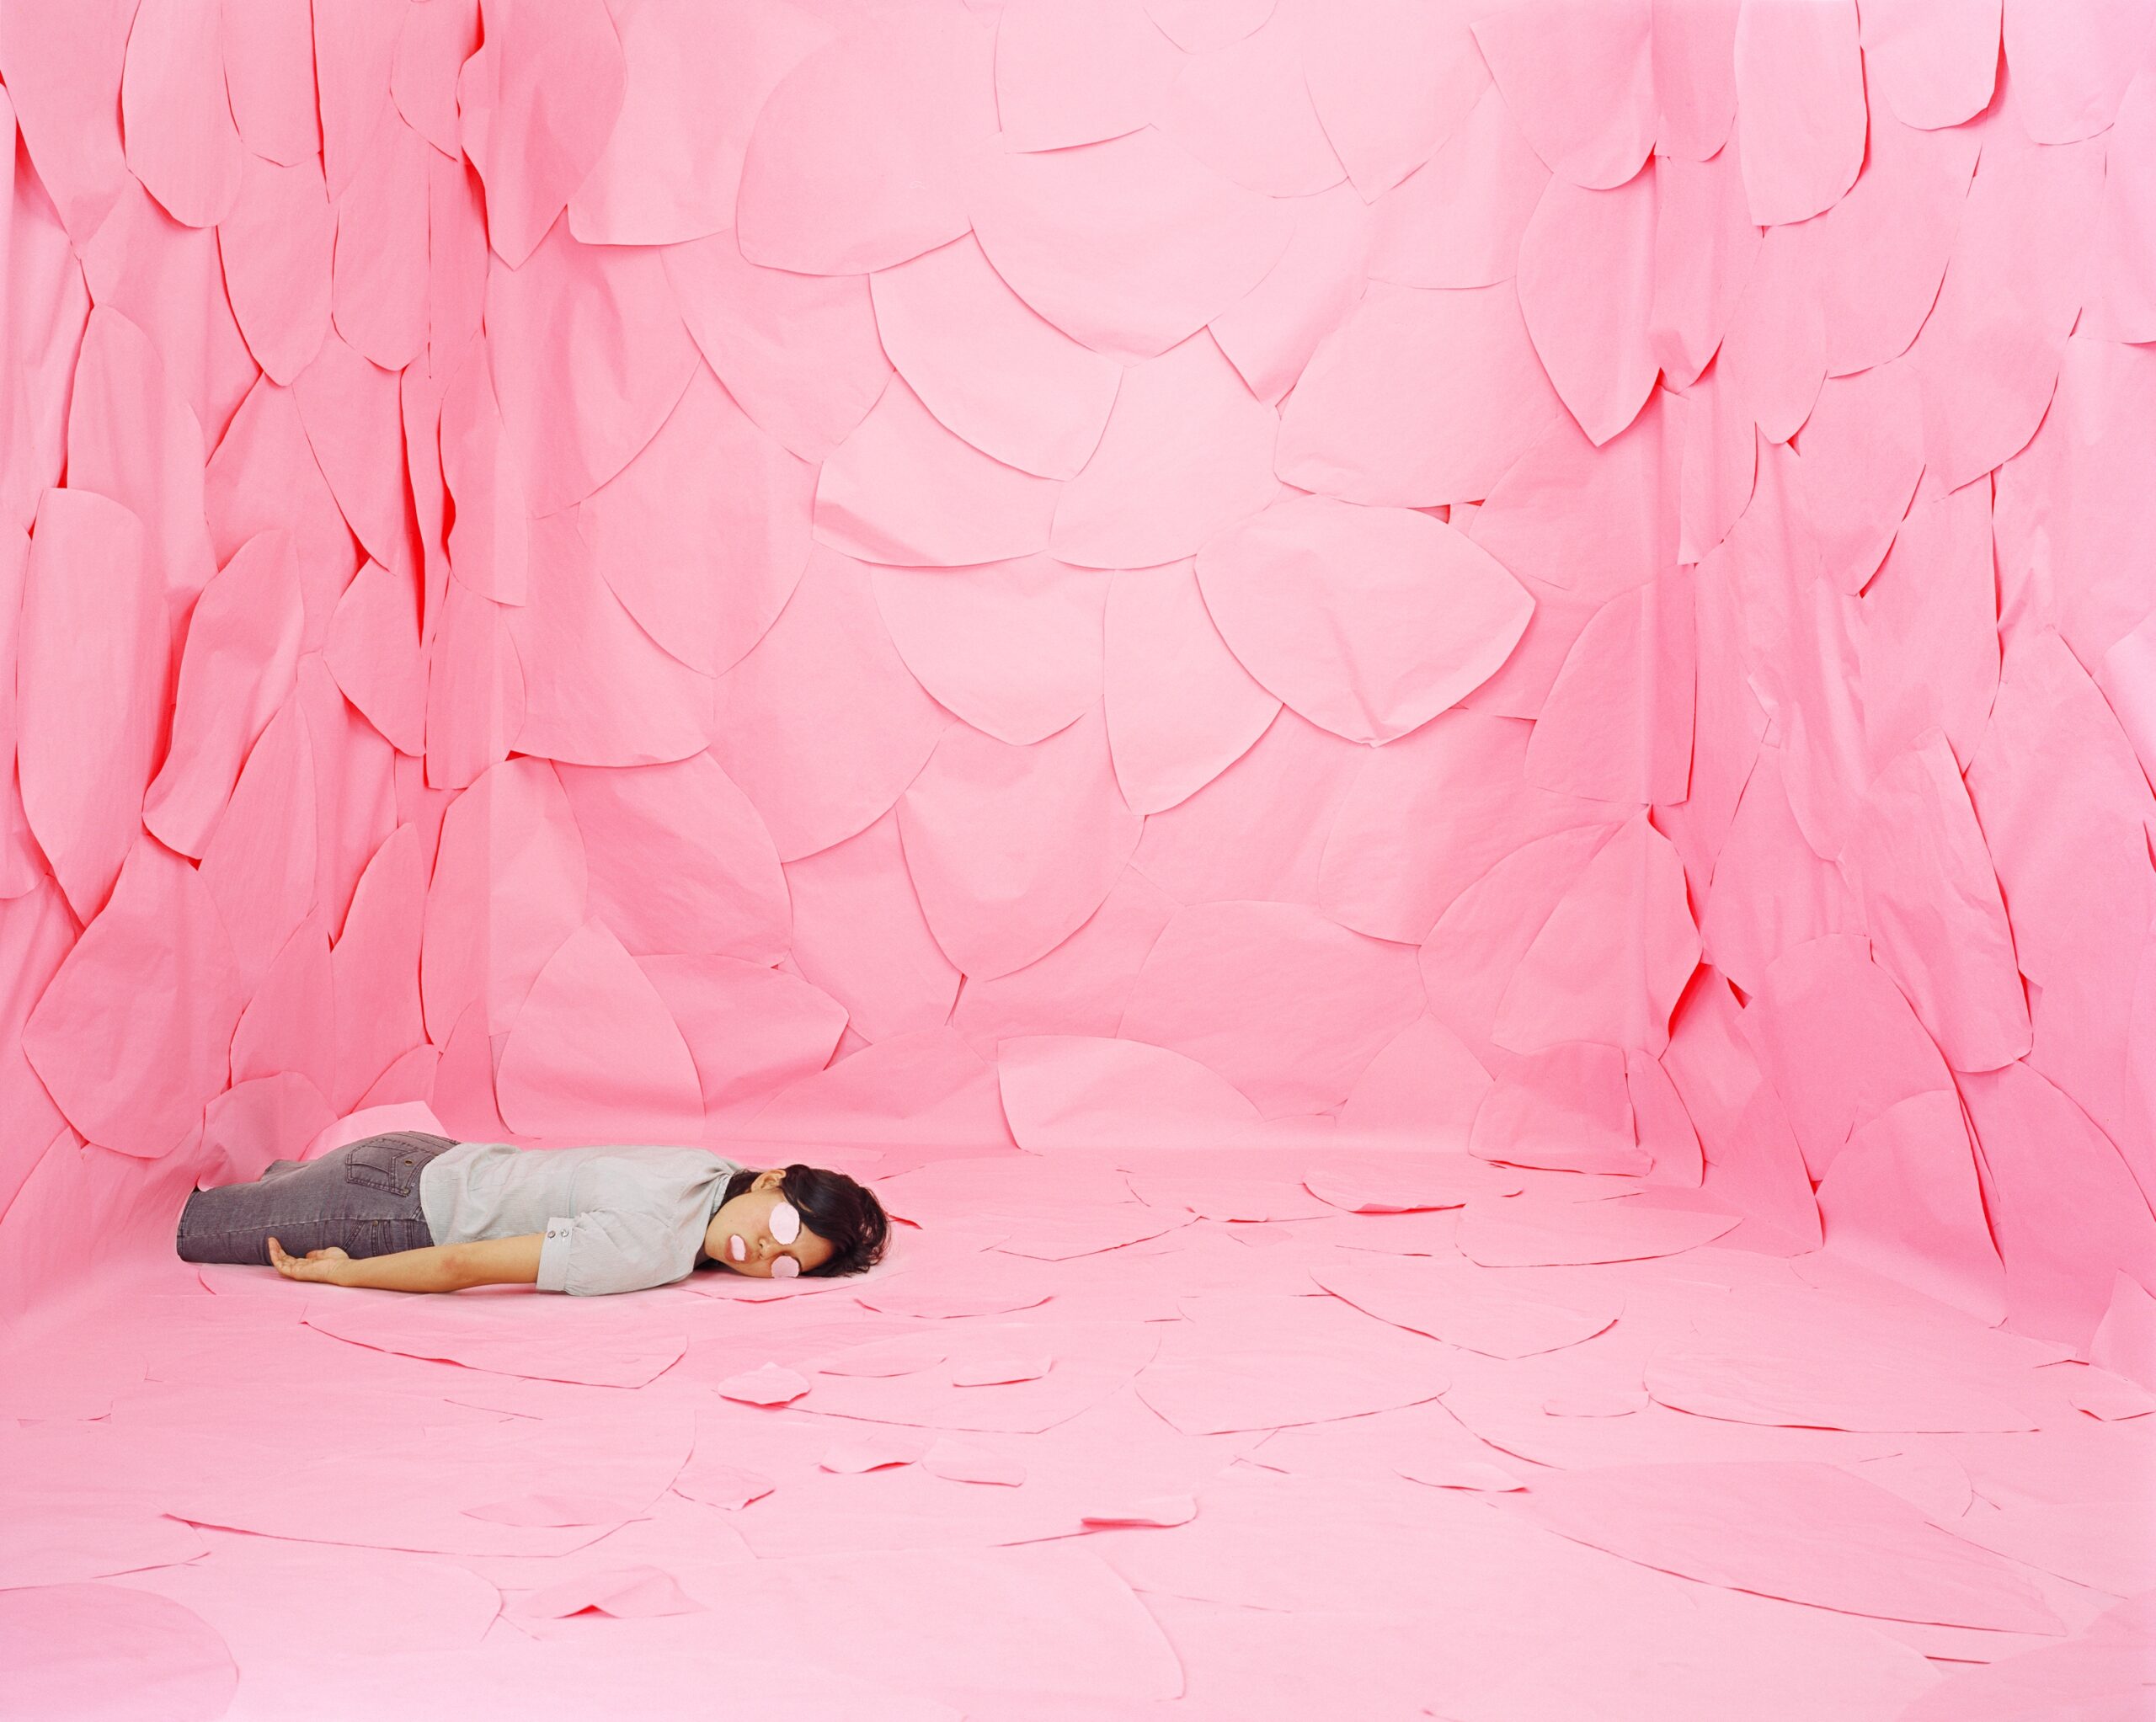 Gina Osterloh, Mute Rash, 2008. 30 x 38.5 inches, archival pigment print. Image courtesy of the artist, Higher Pictures Generation (New York) and Silverlens (Manila and New York)